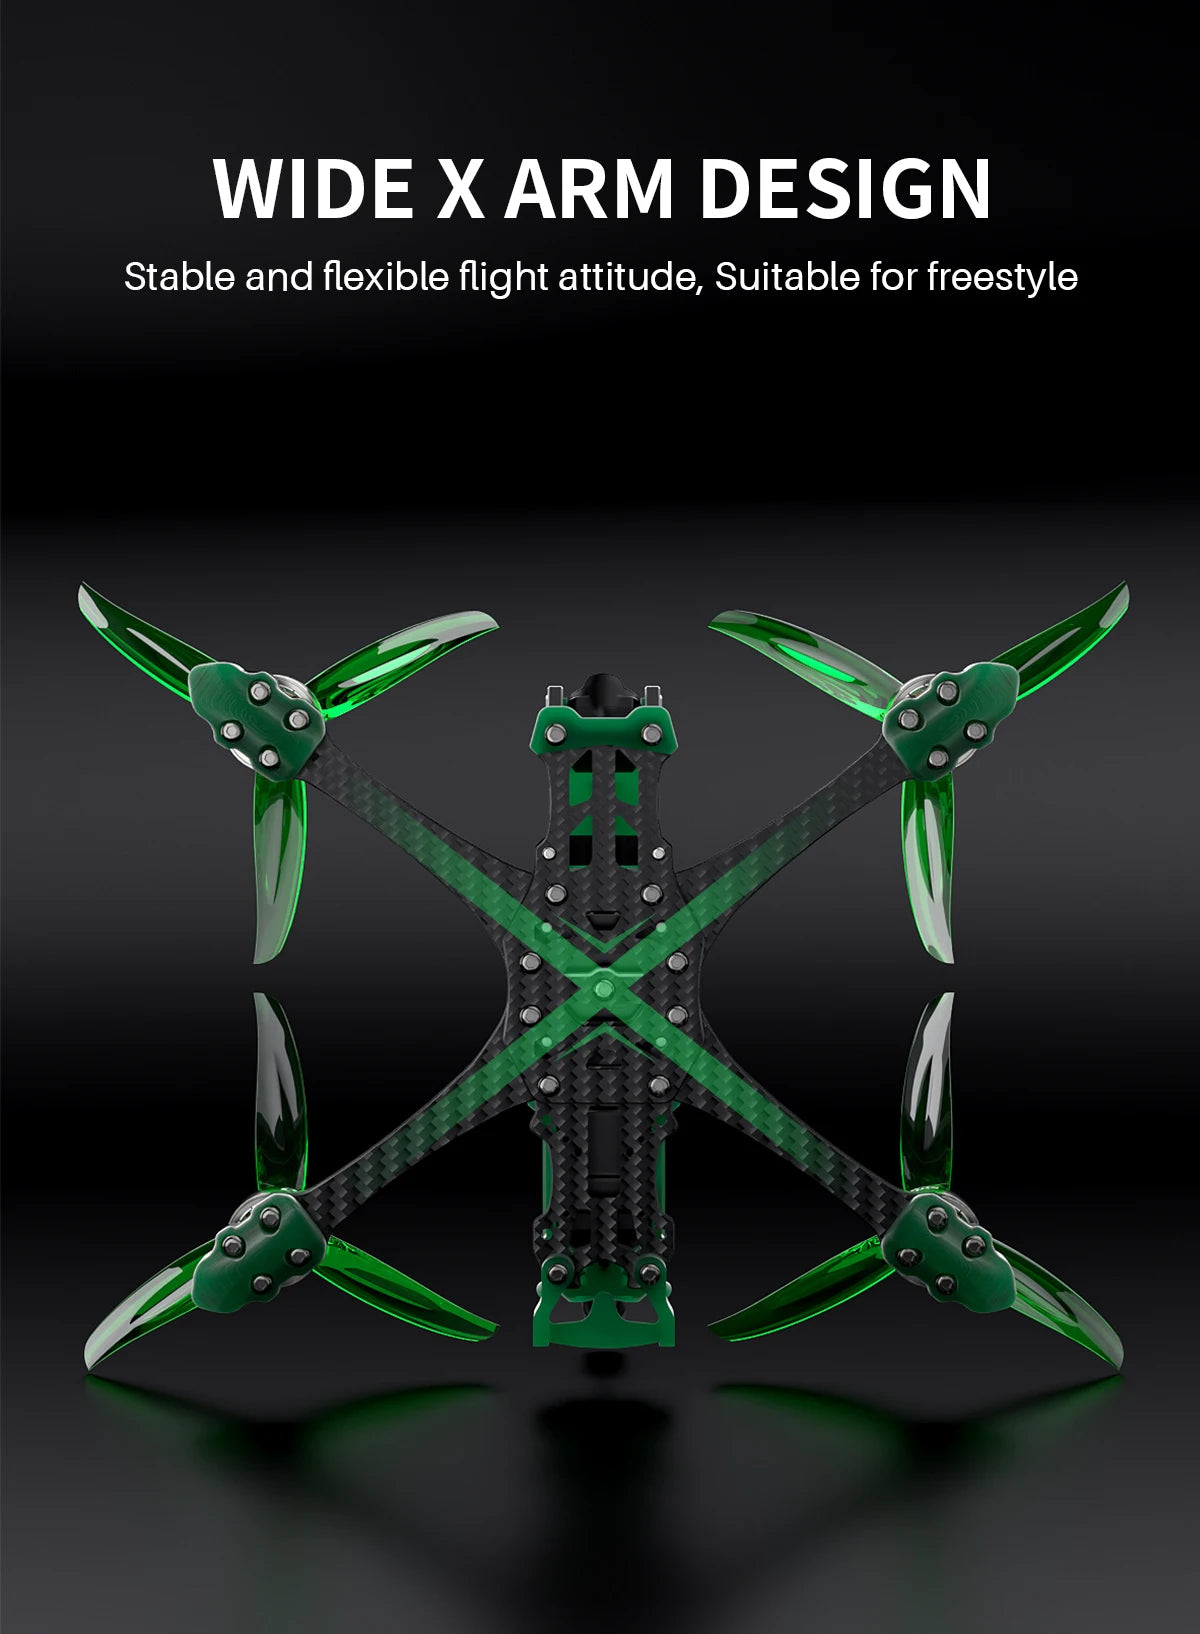 WIDE XARM DESIGN Stable and flexible flight attitude, Suitable for freestyle